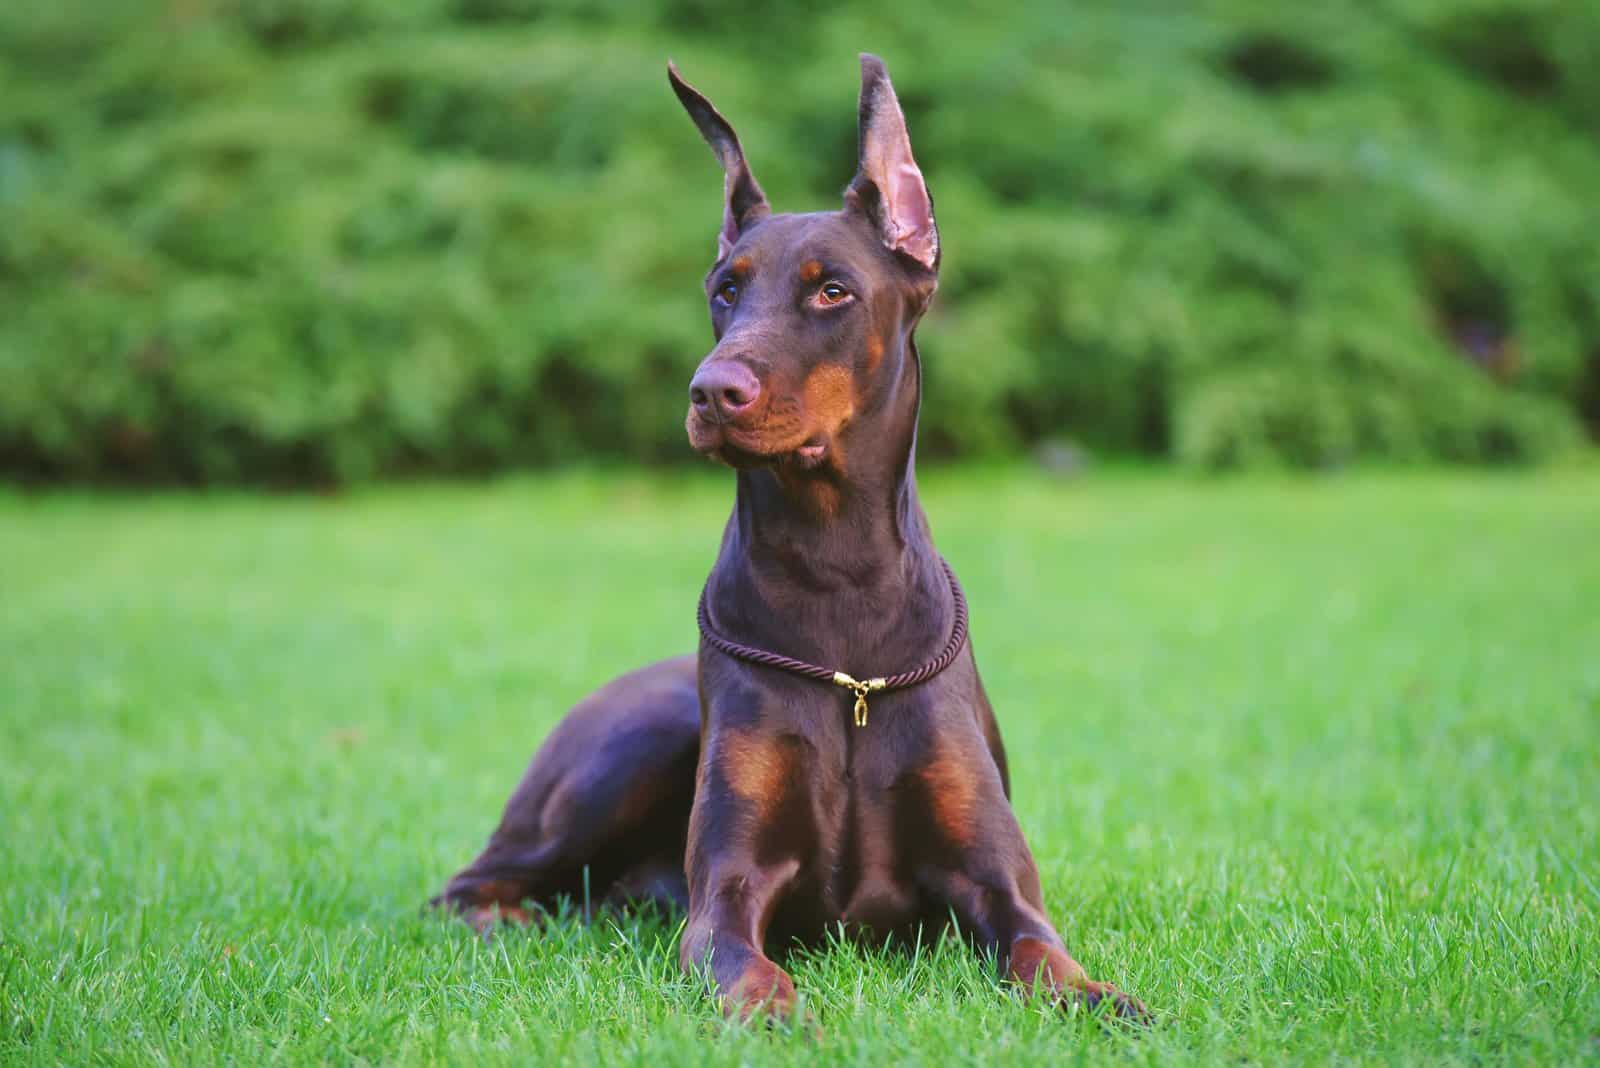 Doberman with cropped ears sitting on grass 